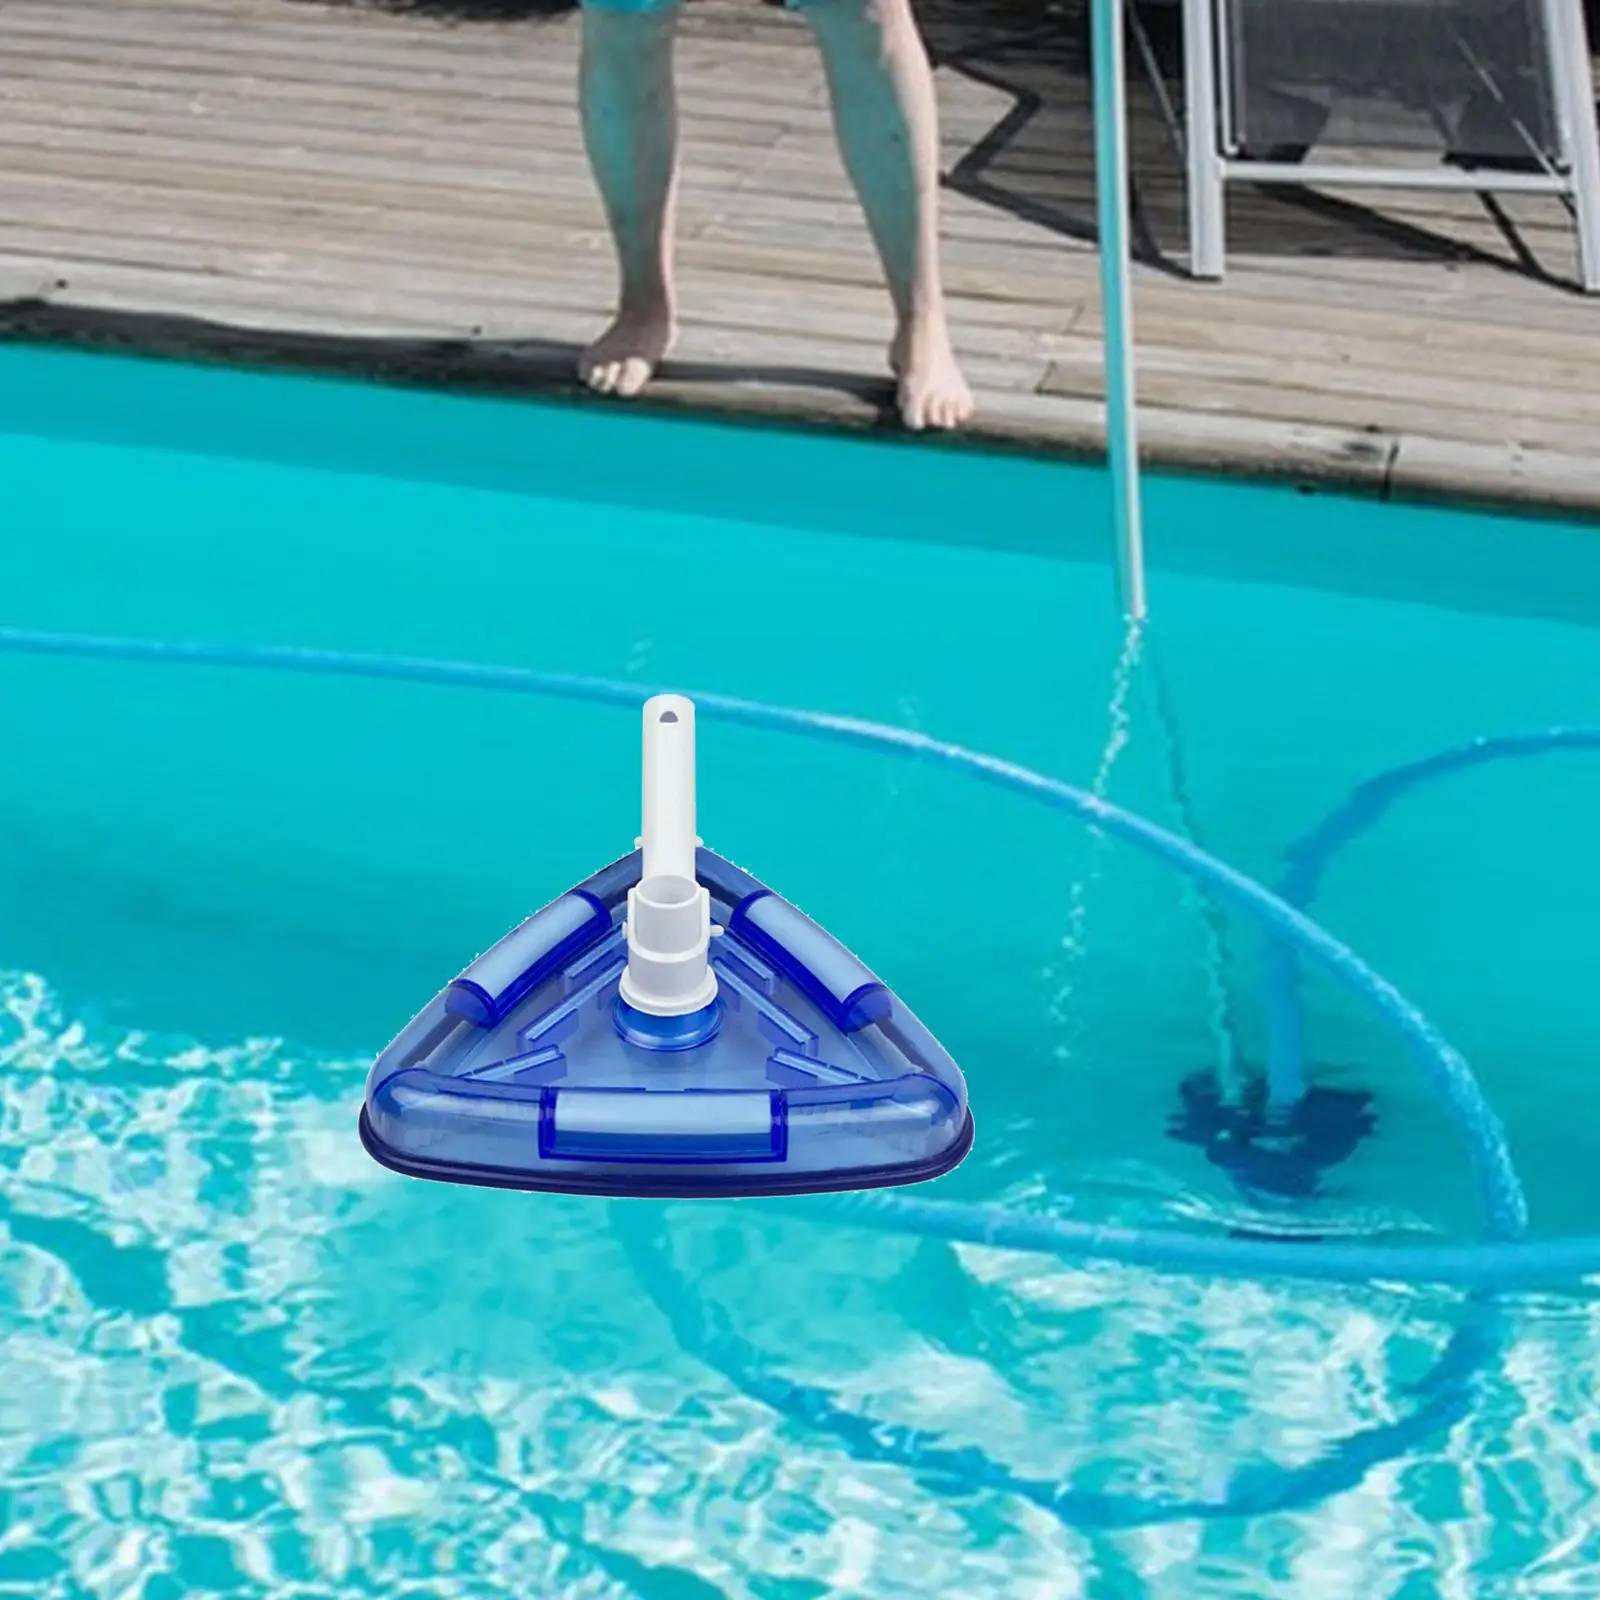 Transparent Triangular Pool Vacuum Head with Swivel Hose Connection, SPA Pool Suction Head for above Ground Pools